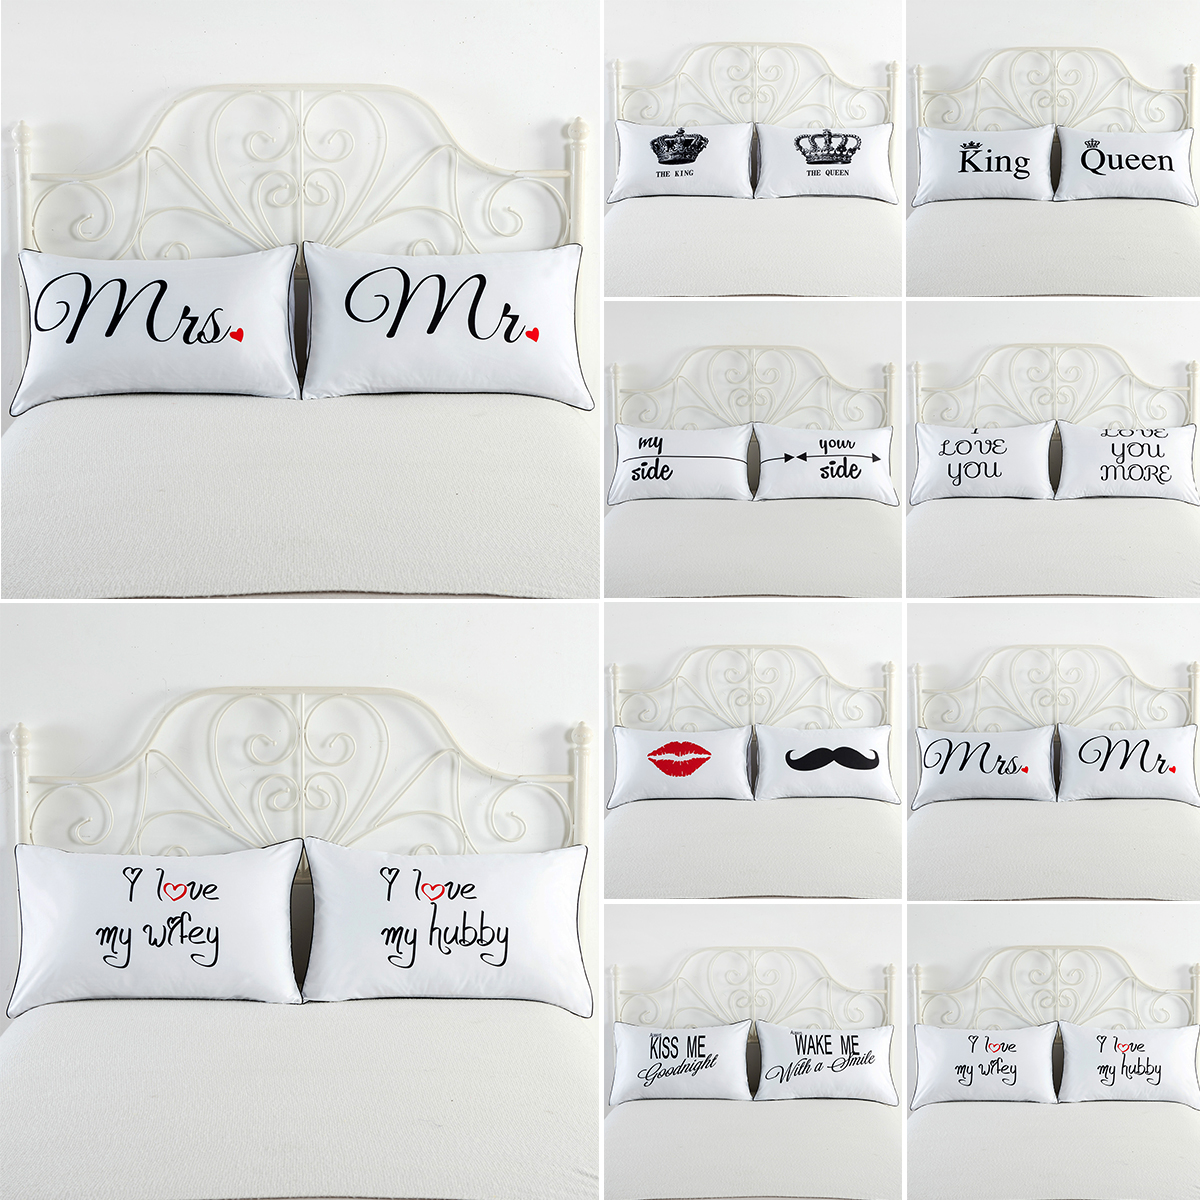 2PCS-White-Cotton-Home-Hotel-Decor-Standard-Pillow-Case-Bed-Throw-Cushion-Cover-1258866-2